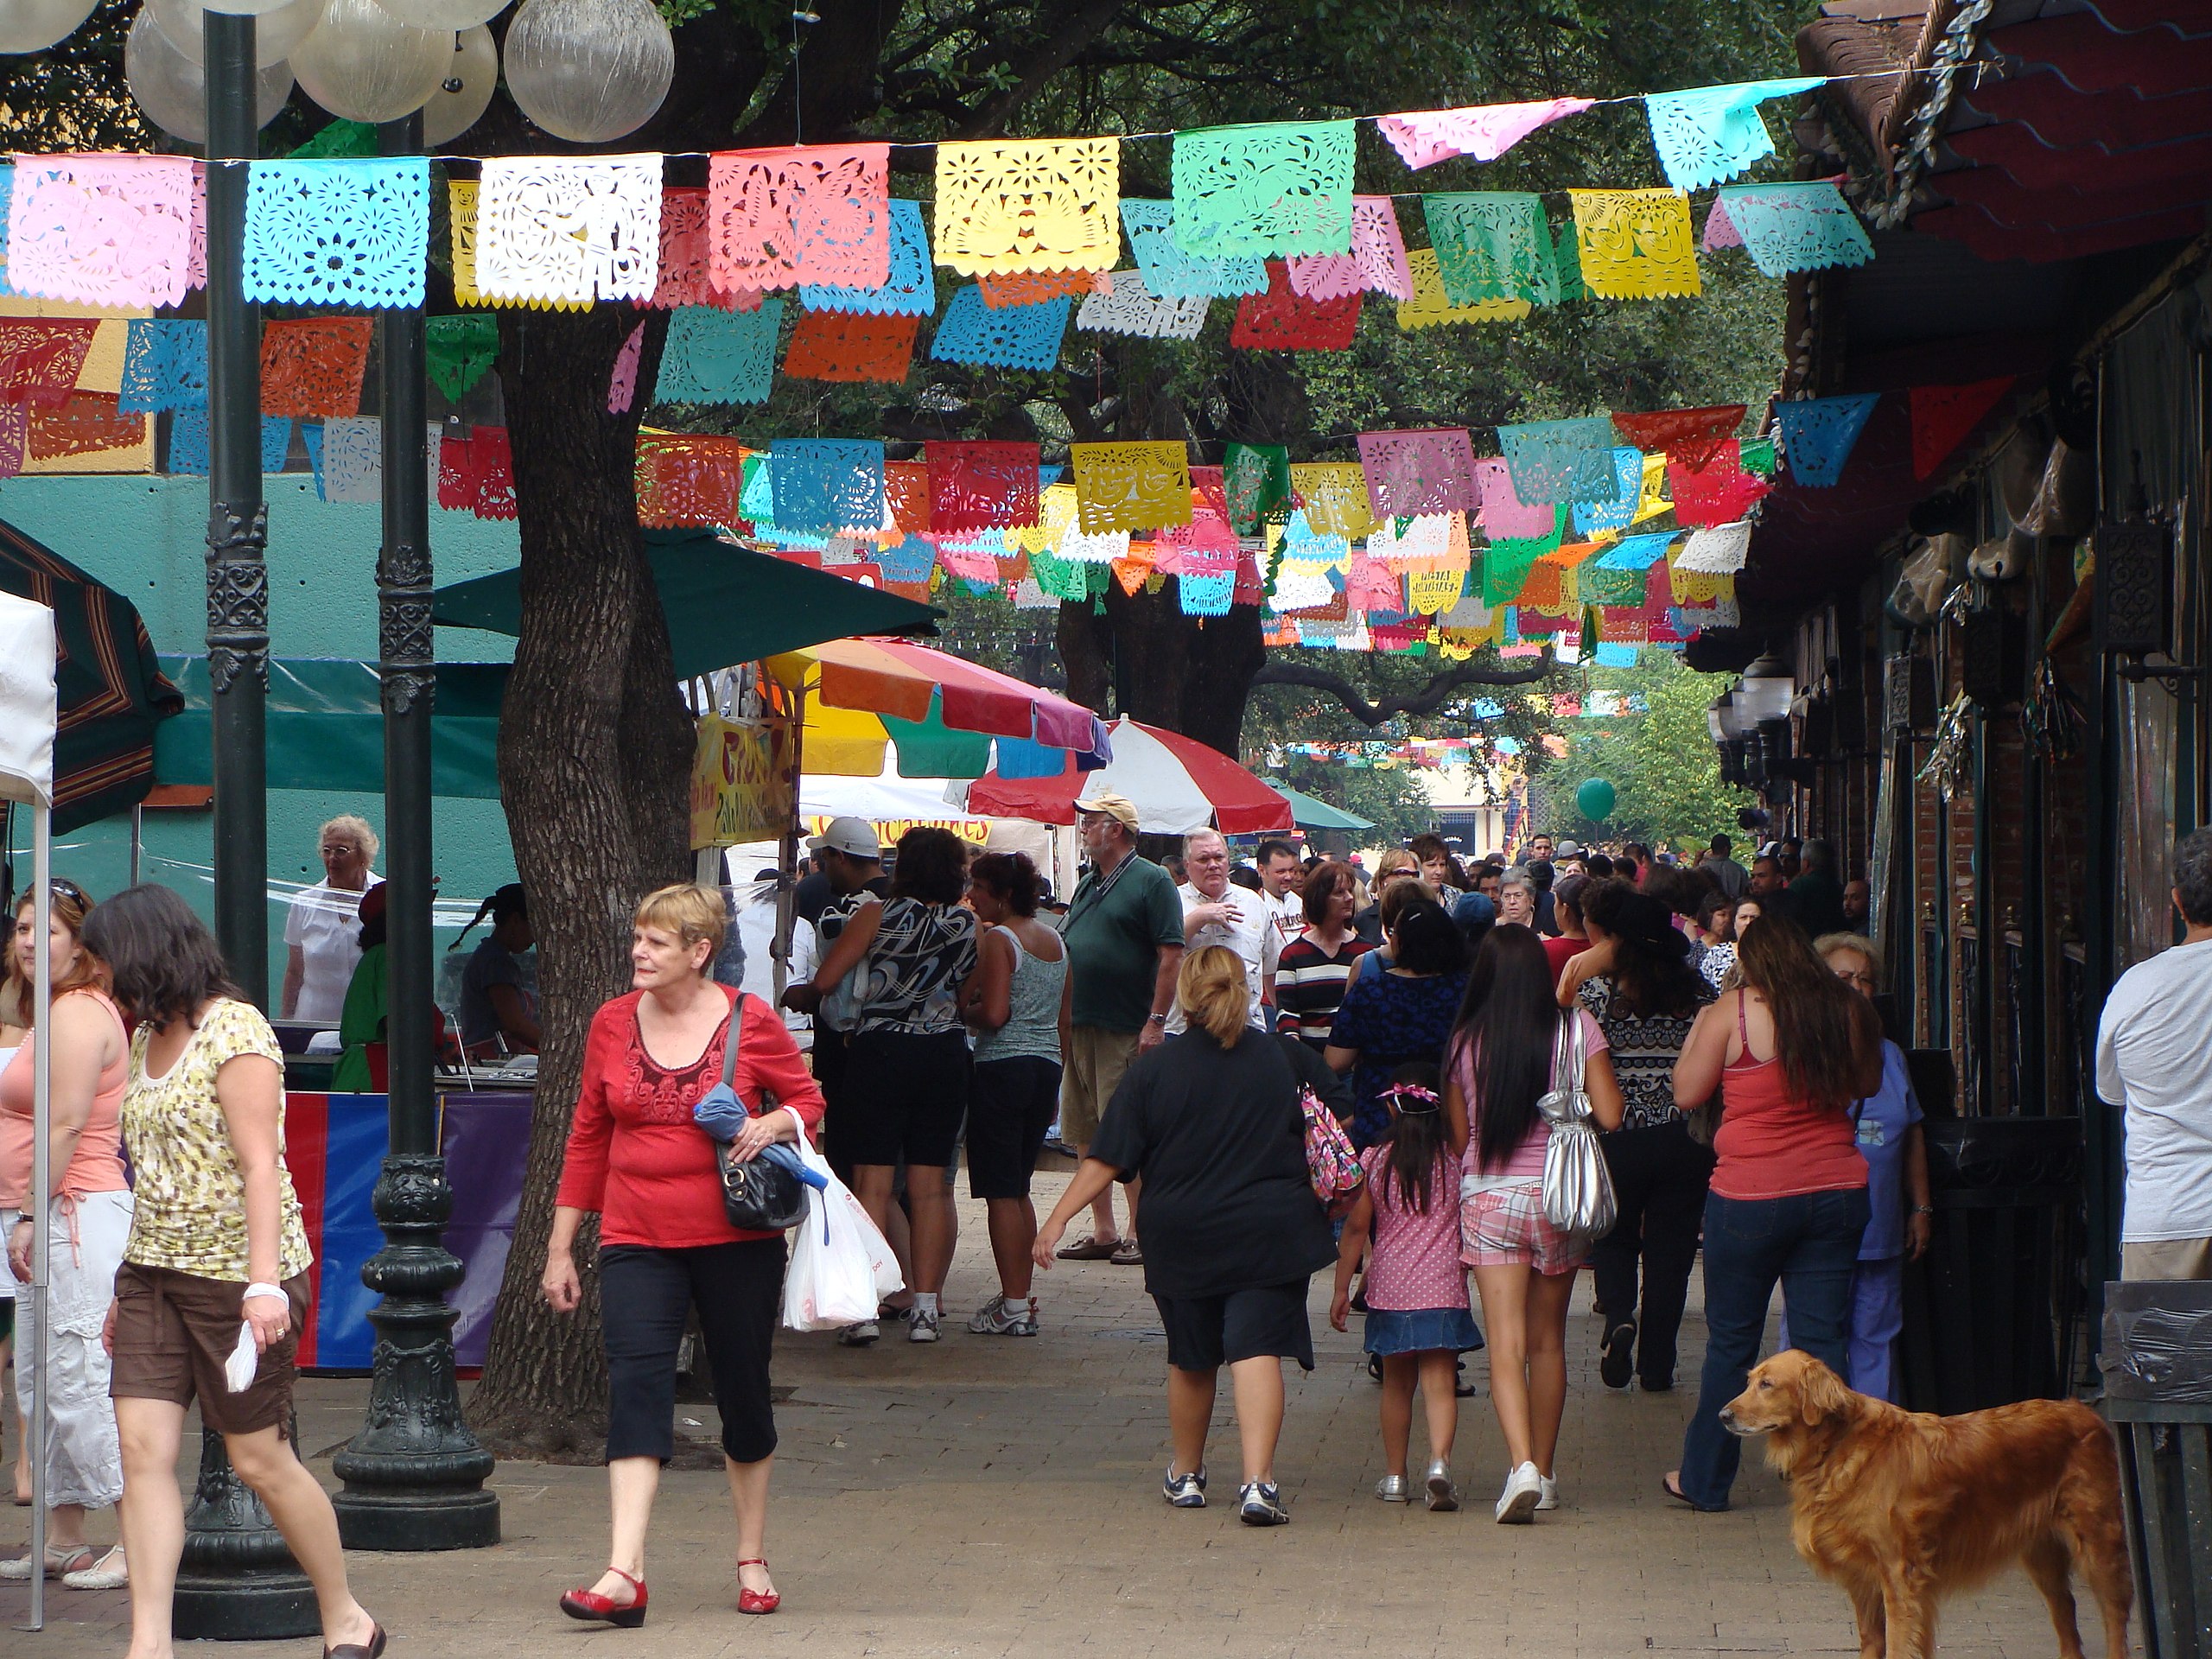 Here is a picture of the San Antonio Market Square. There are lots of people walking around, seeming to have a fun time. Above them are colorful papel picado hanging around, remnant of the strong Mexican influence of the city and the marketsquare itself.